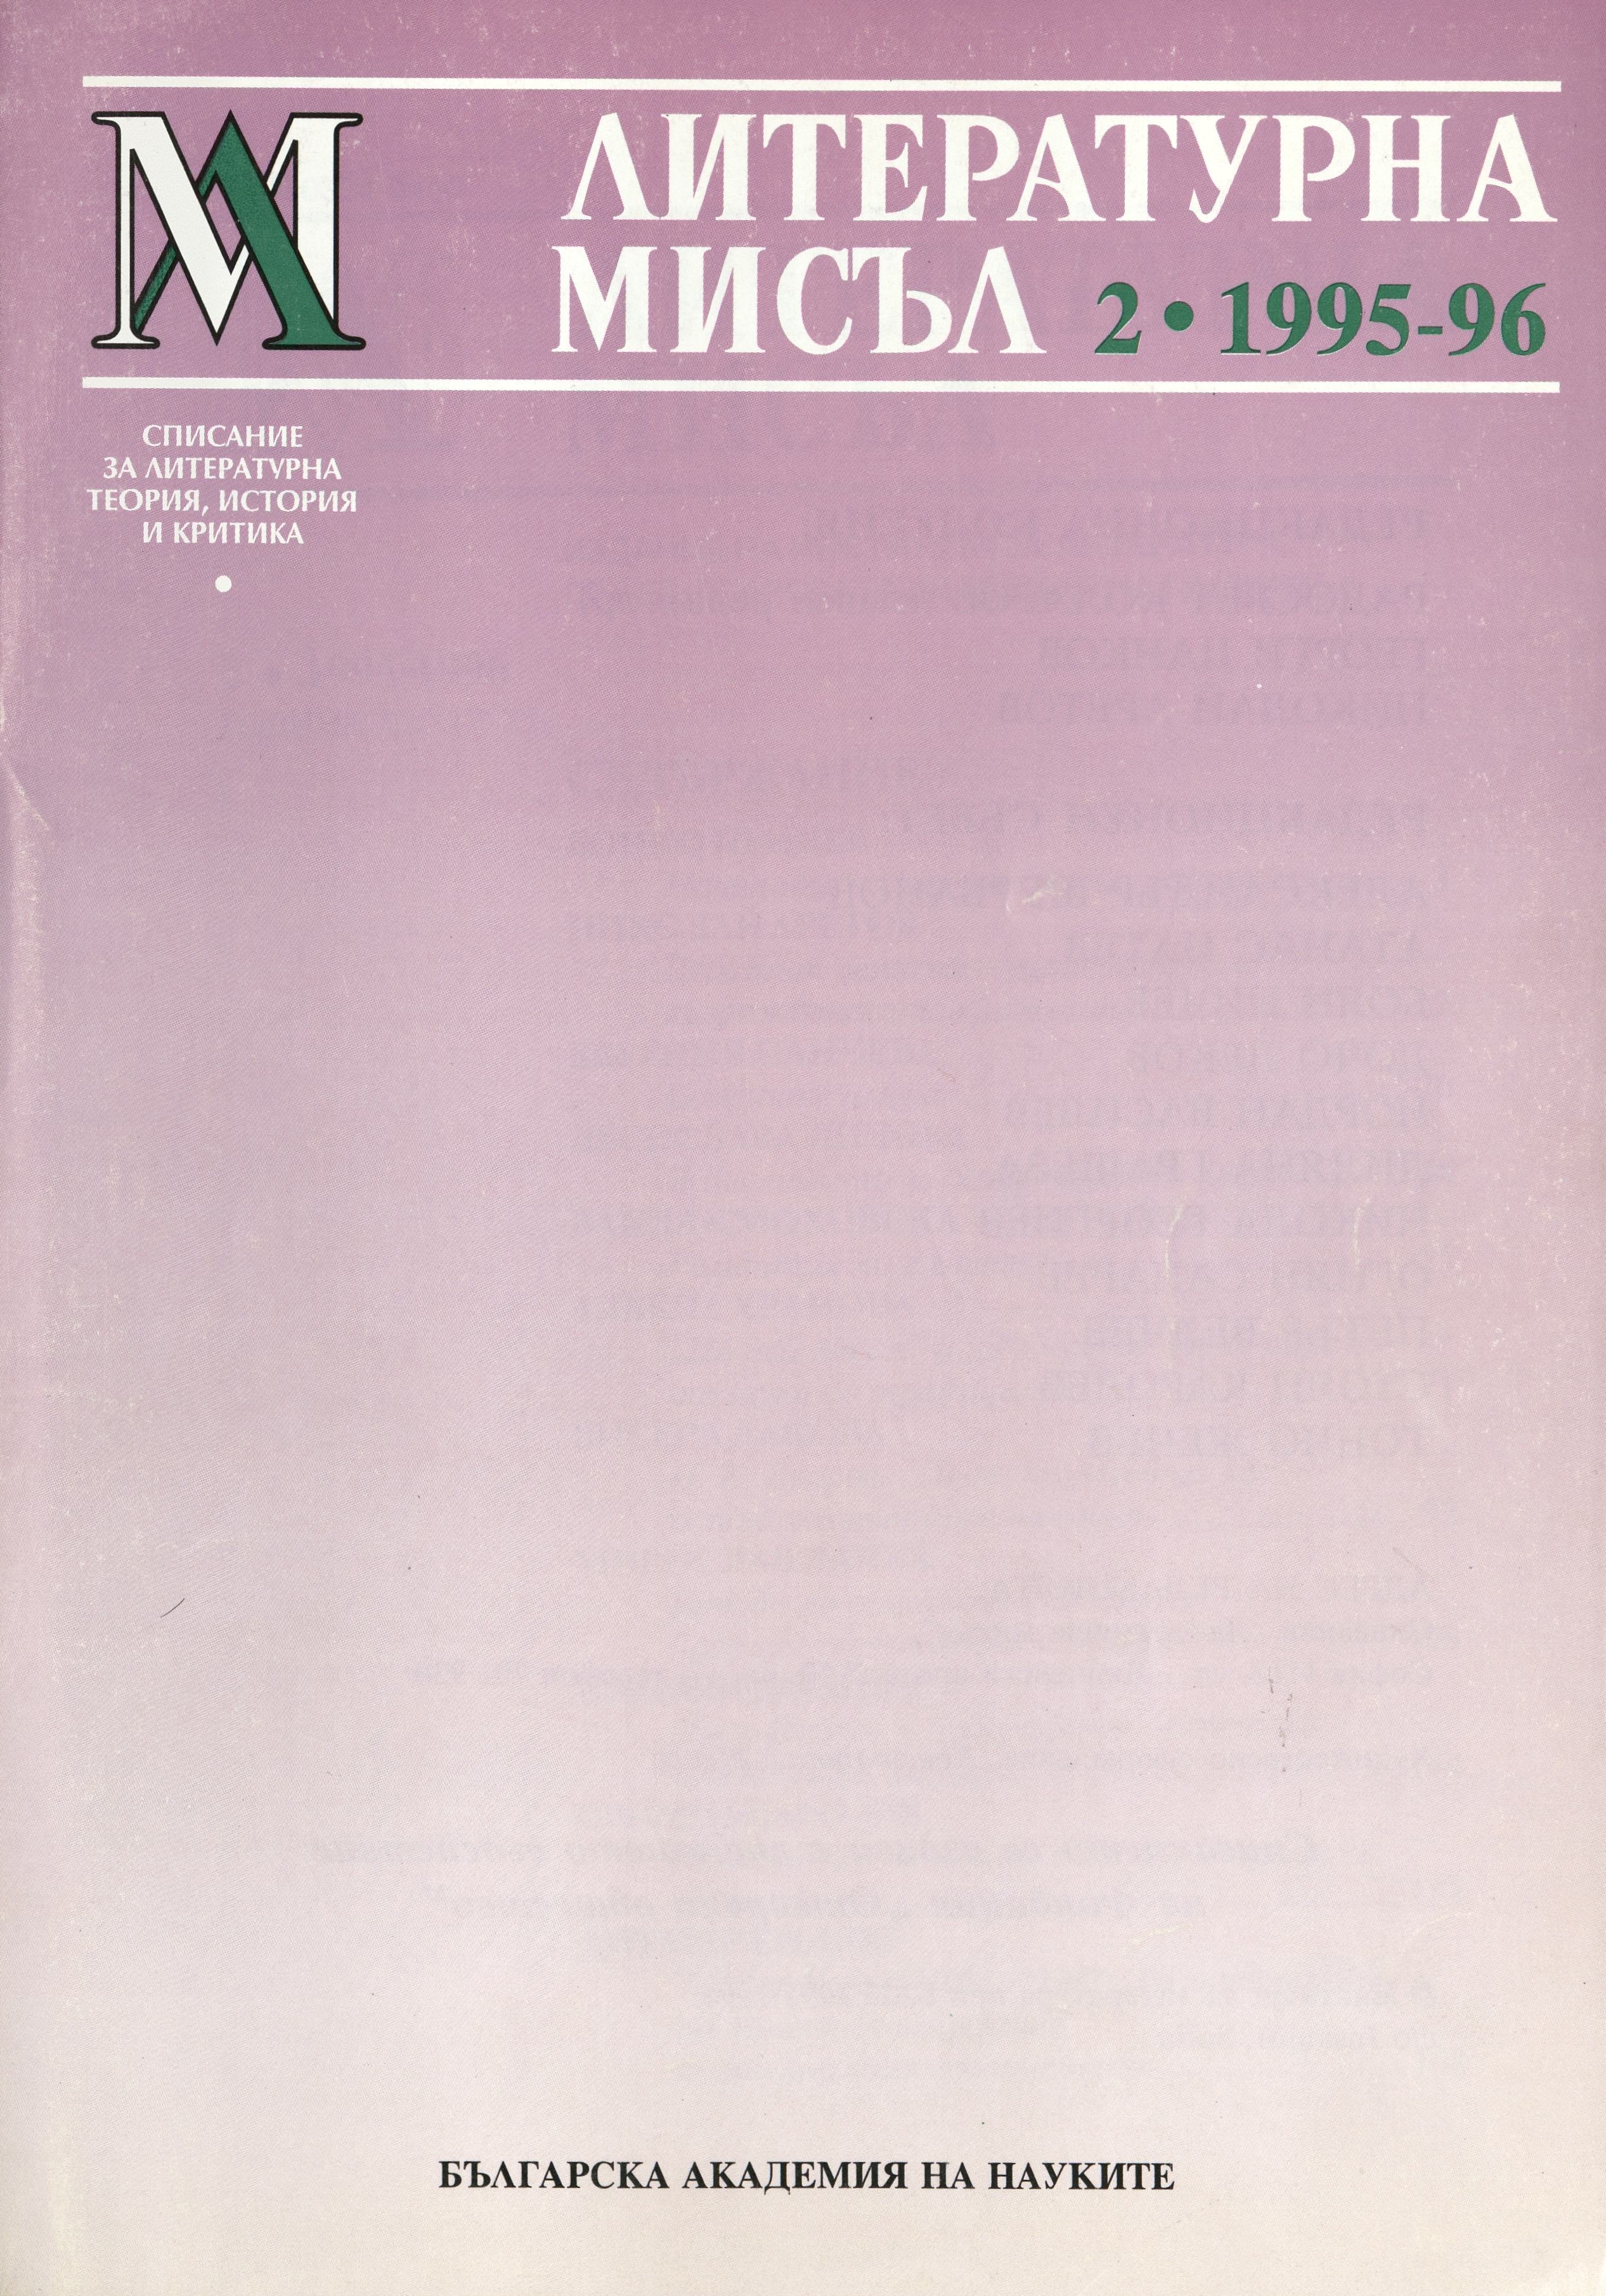 Issue 2, 1995-1996